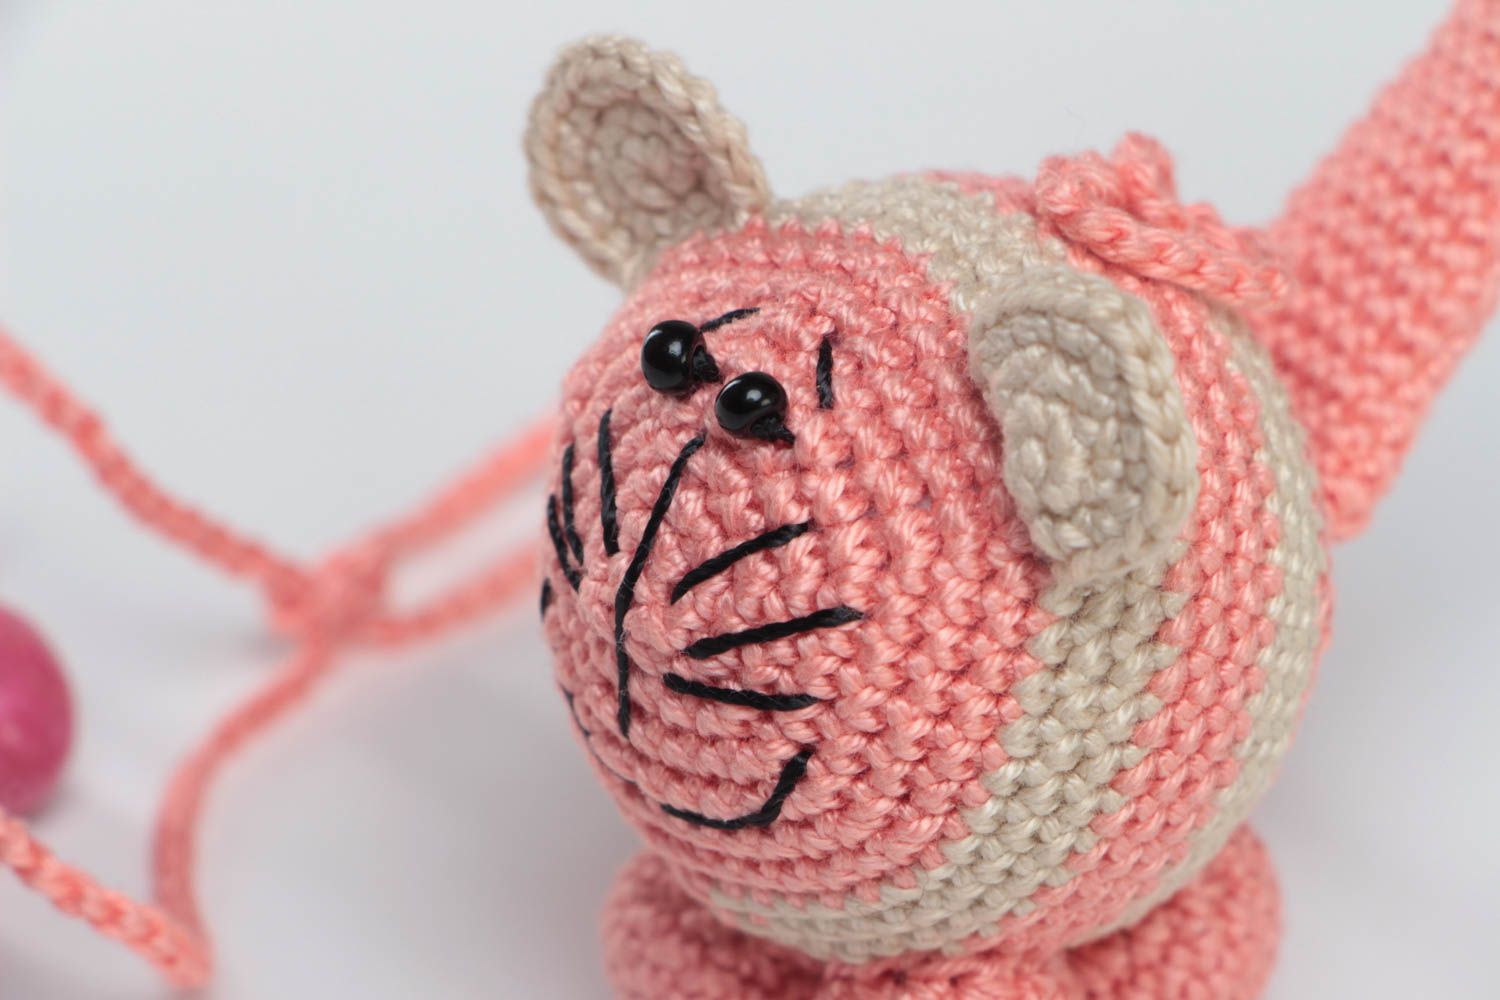 Crocheted cotton rattle small pink cat handmade toy for children and nursery photo 3